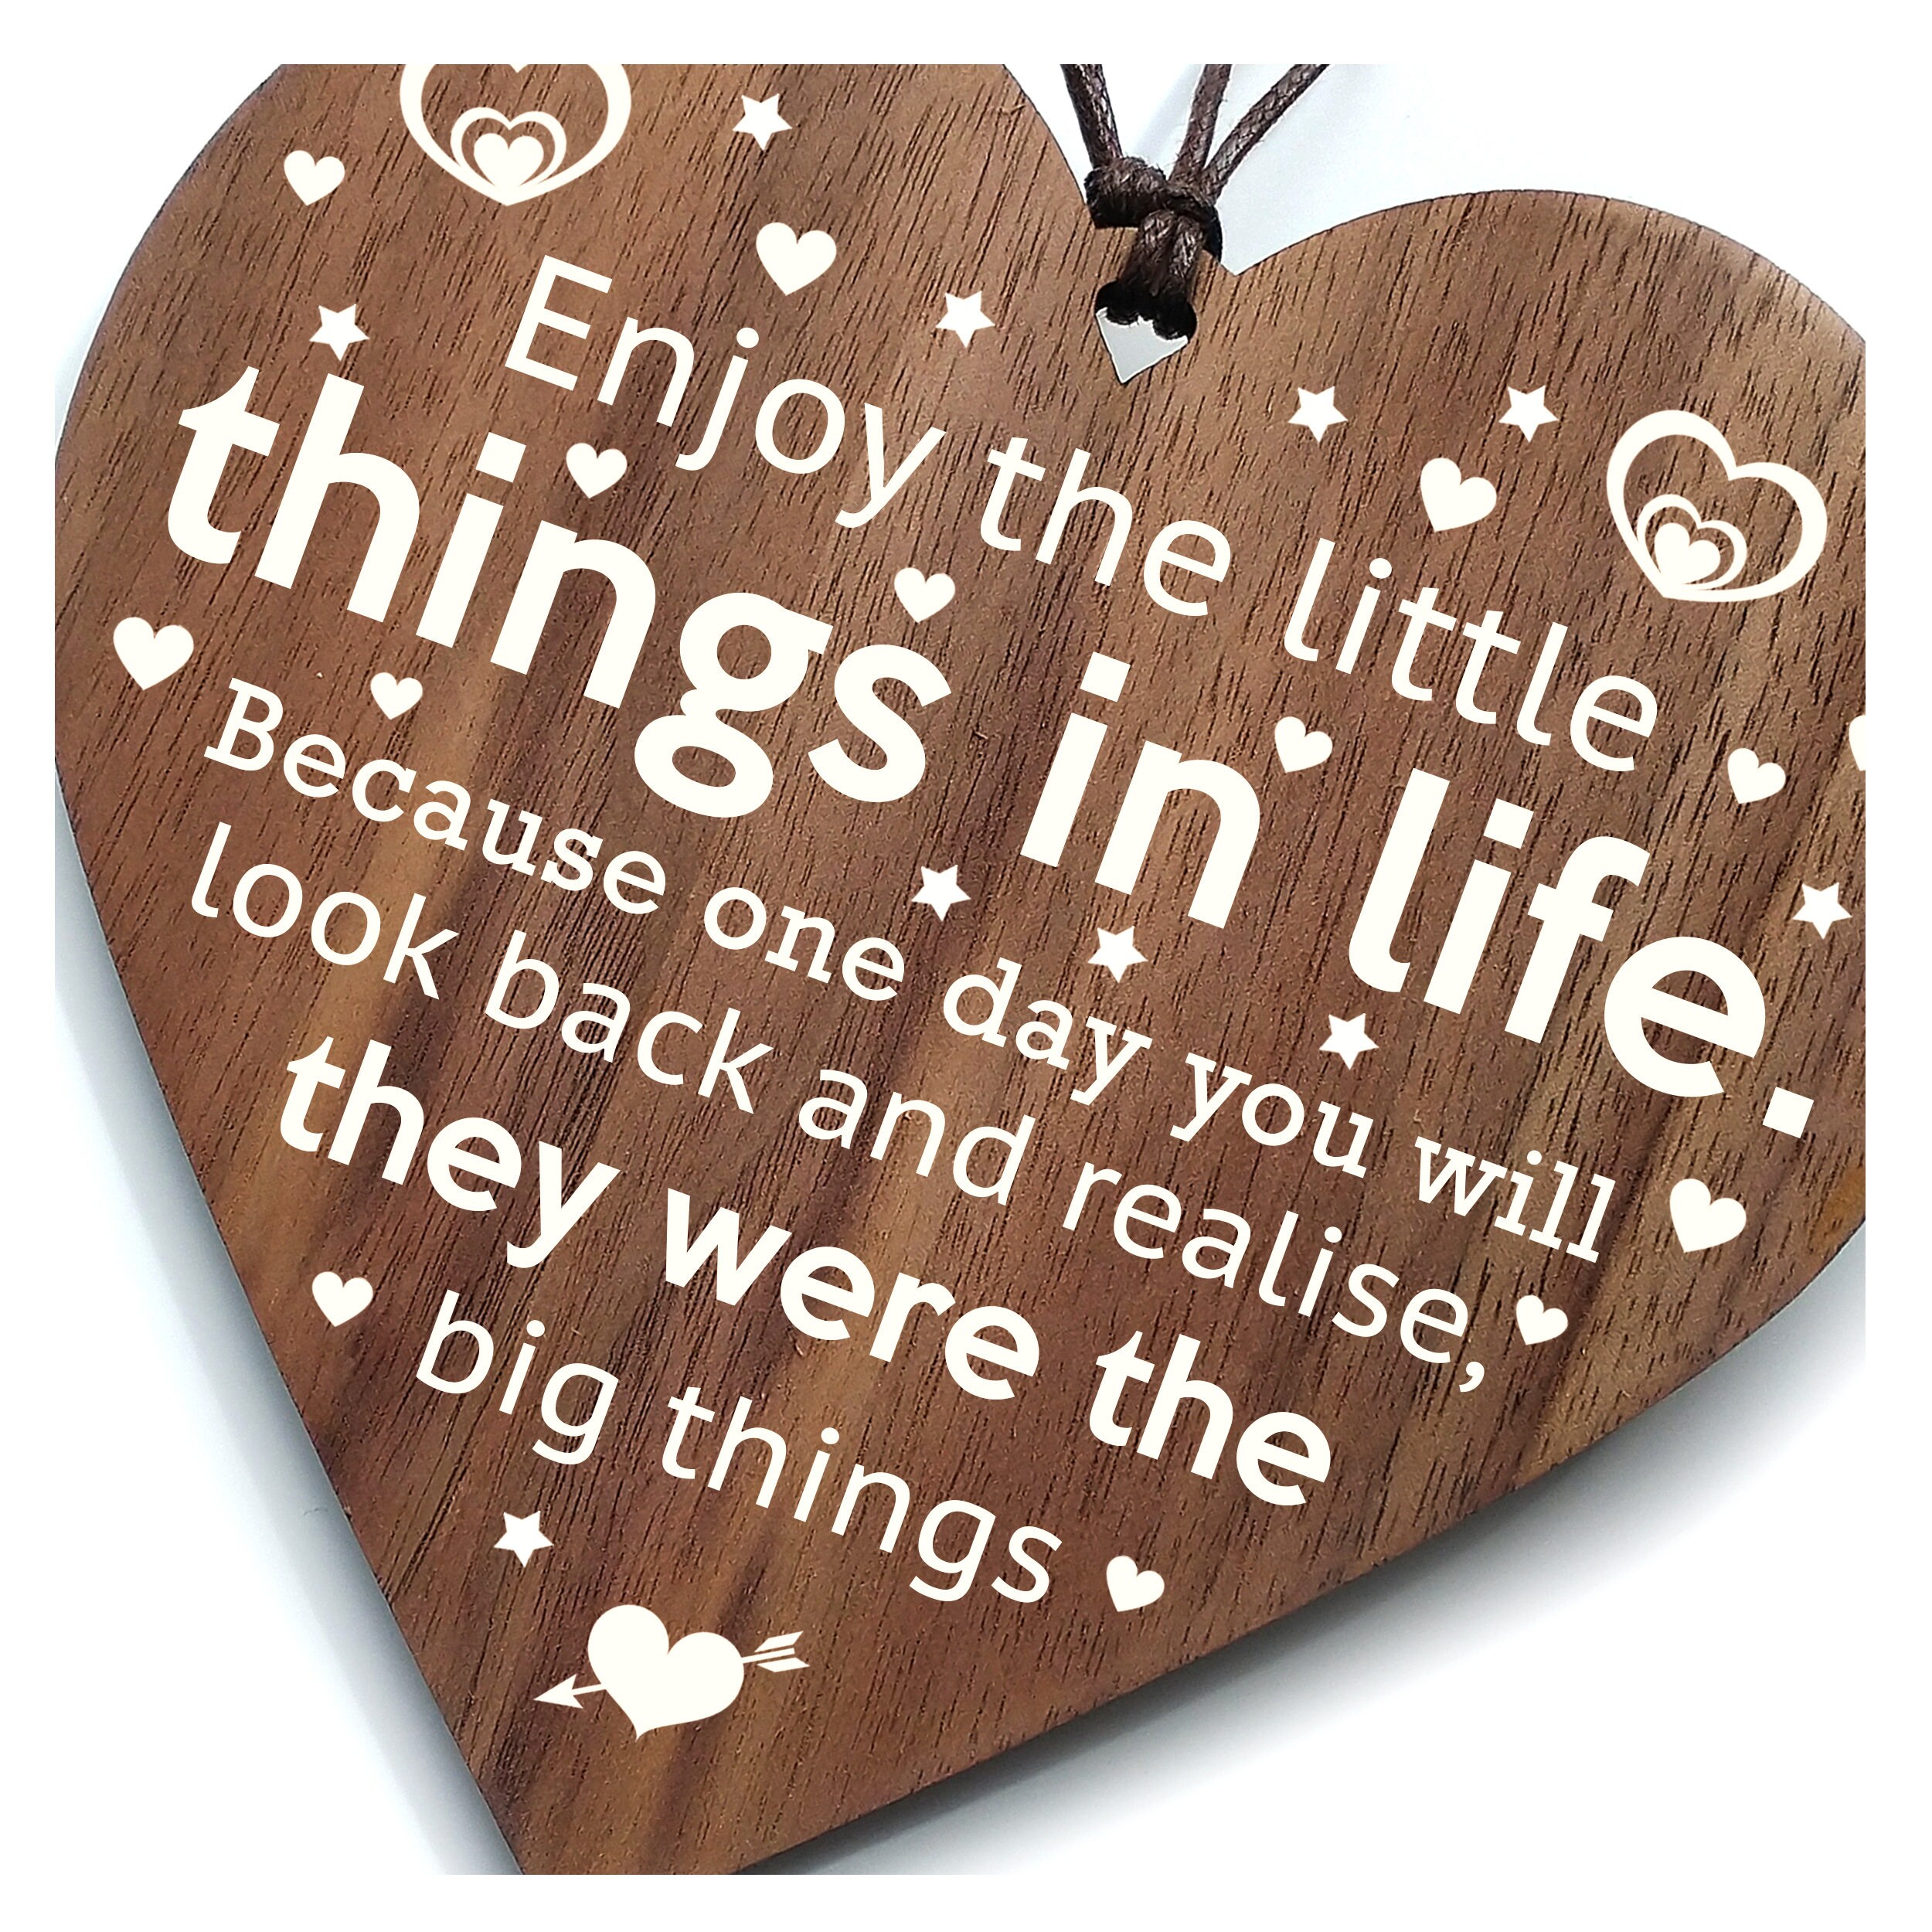 Enjoy The Little Things in life Large Wooden Hanging Message Plaque/Sign 30x45cm